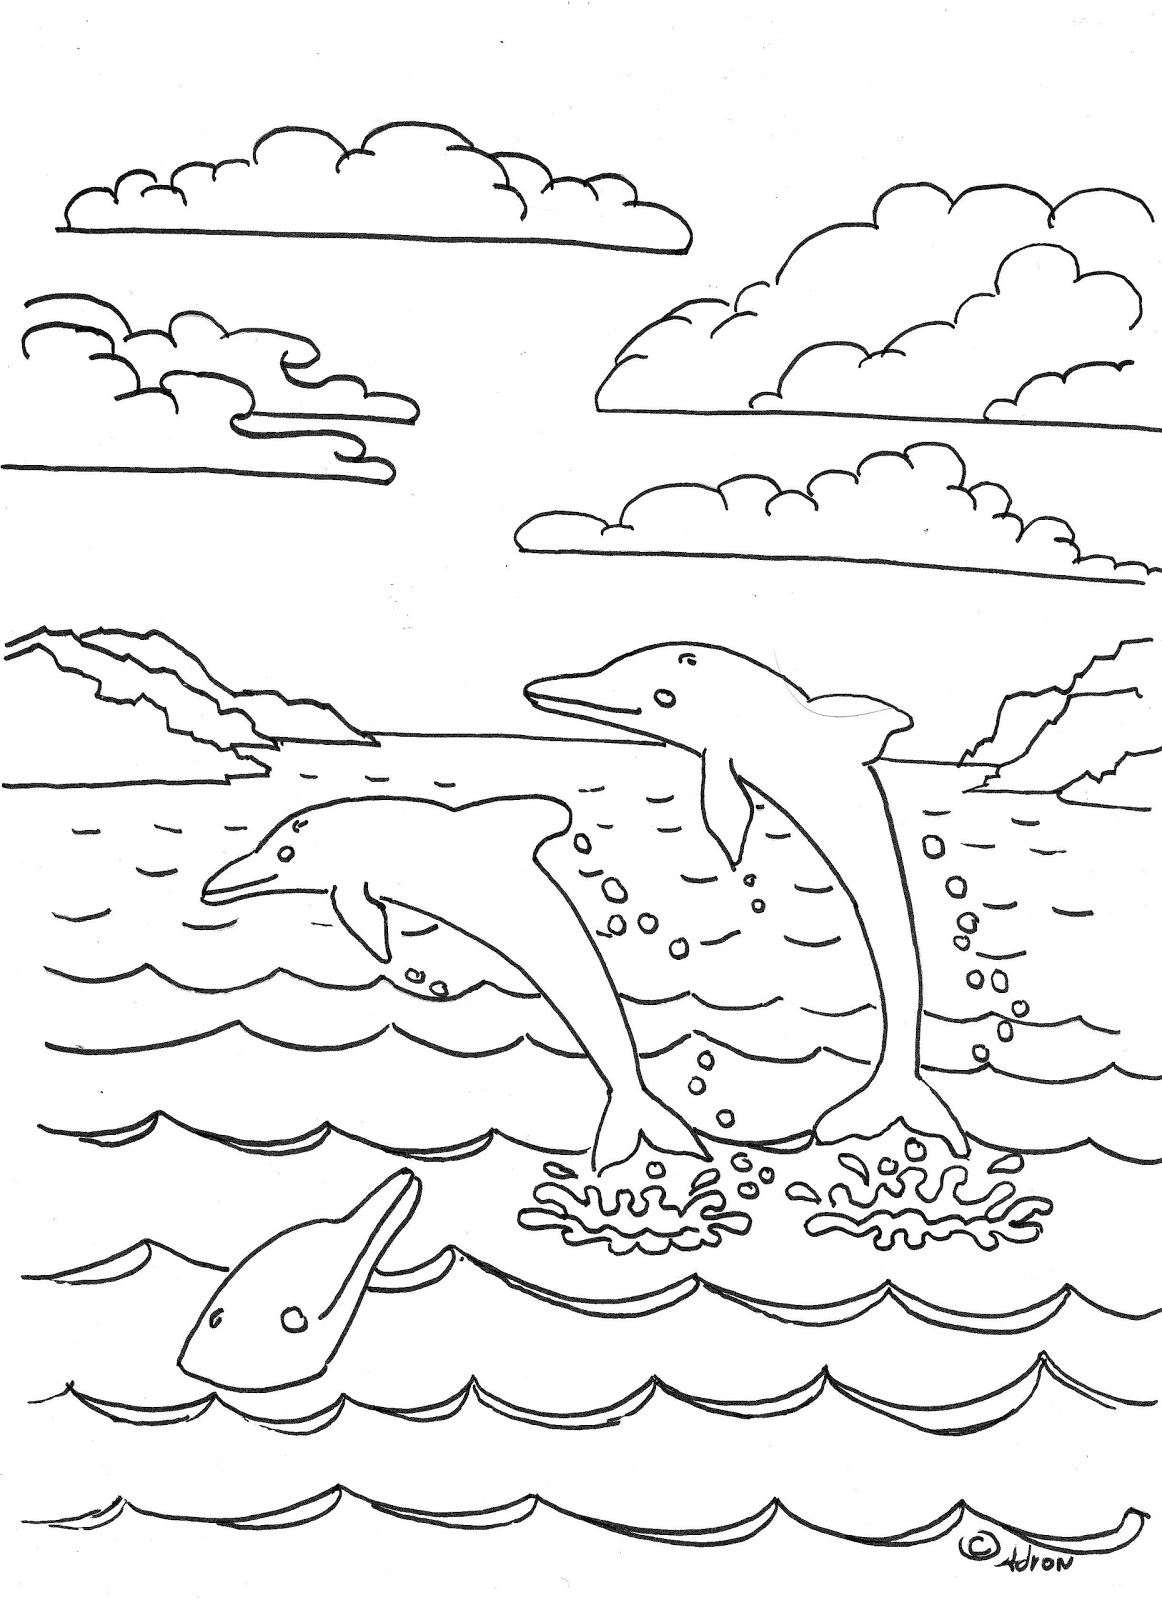  Coloring  Pages  for Kids by Mr Adron Dolphins  Coloring  